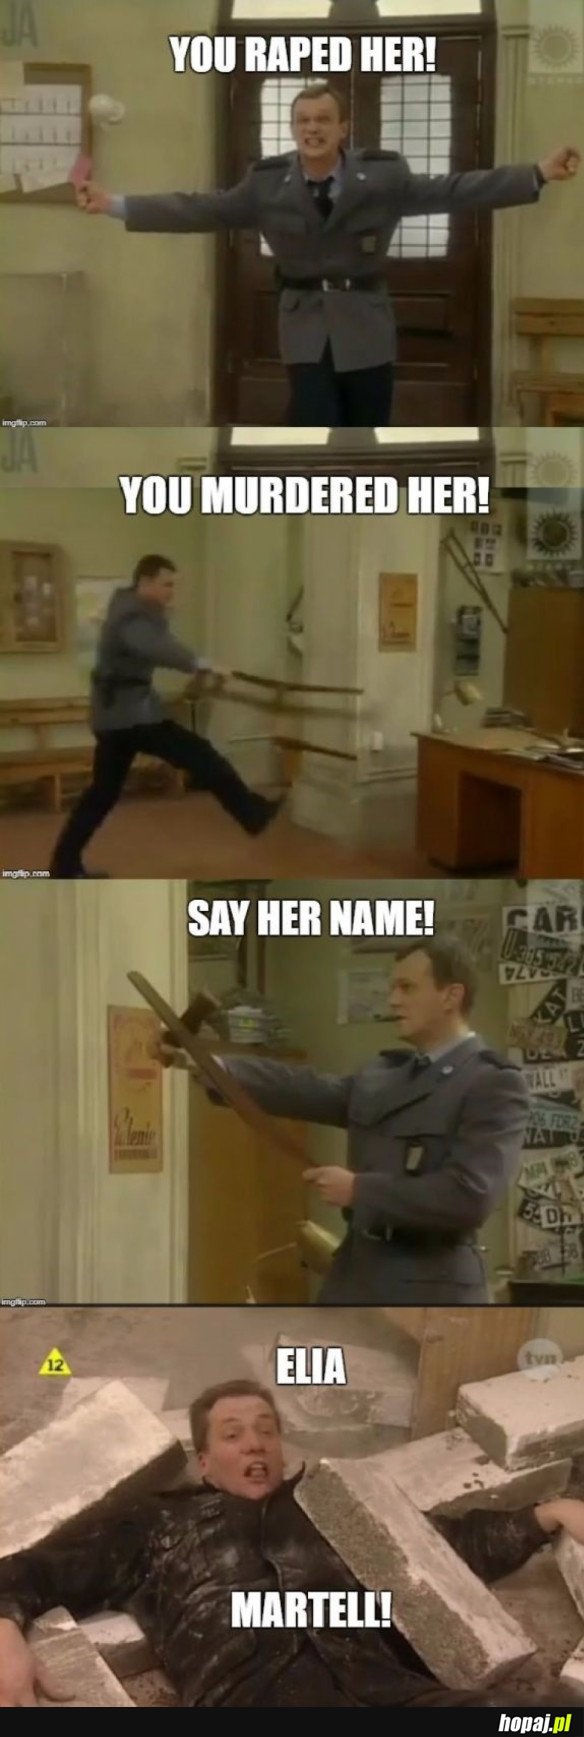 SAY HER NAME!